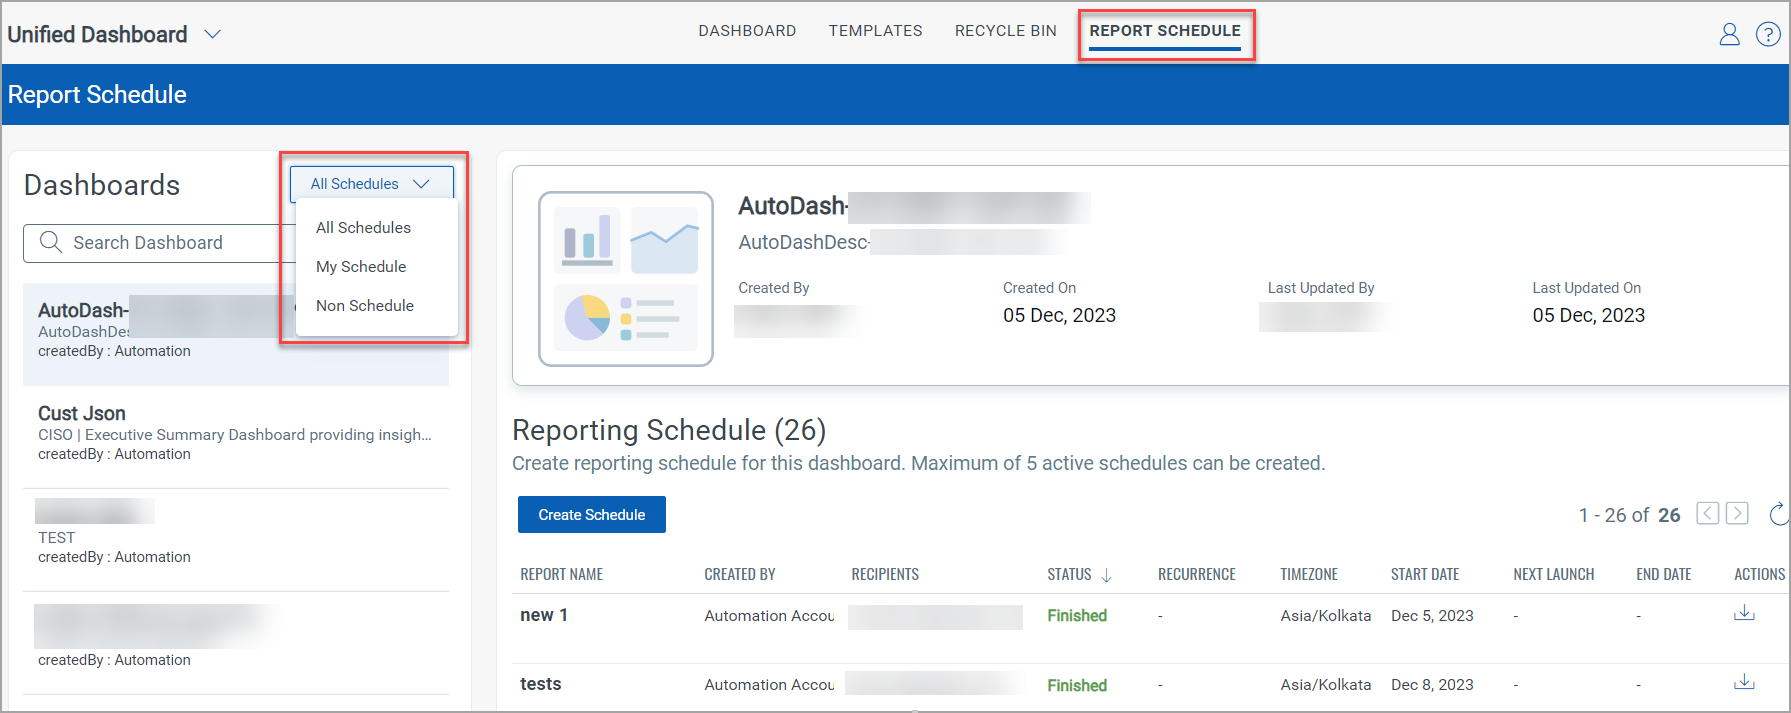 Dashboard schedules option in the Report Schedule tab.